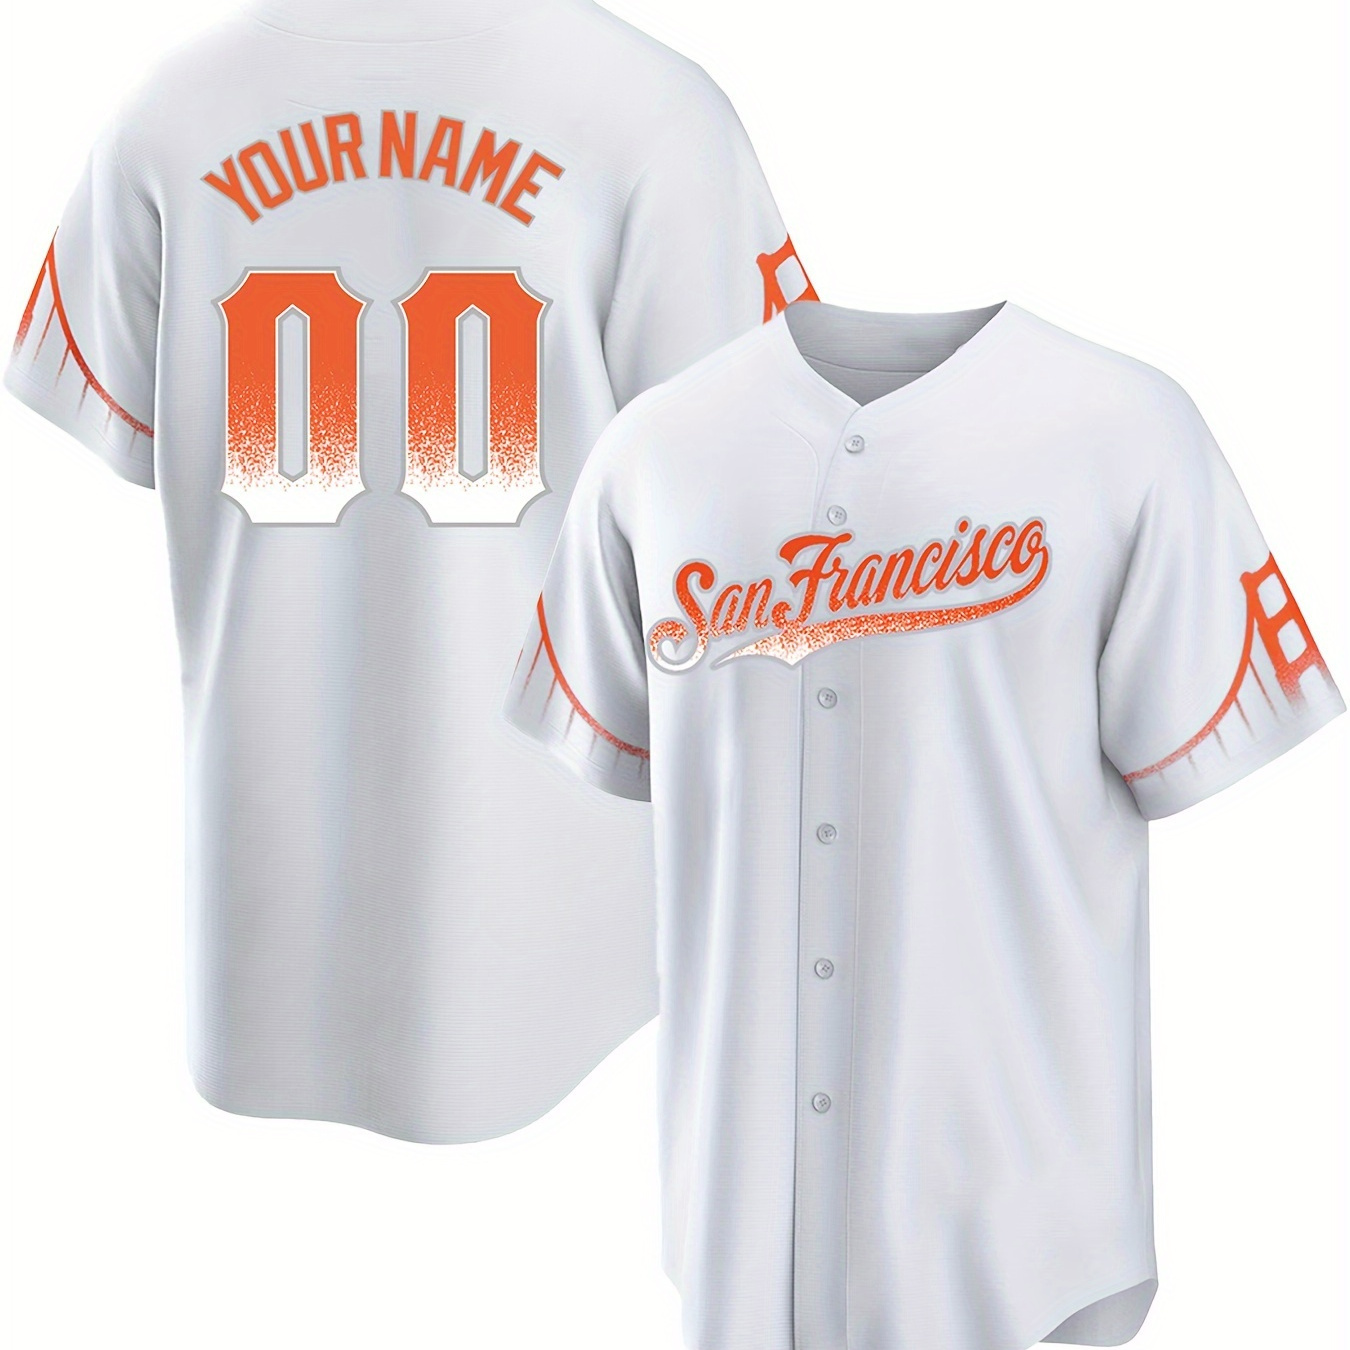 

Customized Name And Number, Men's Short Sleeve V-neck Baseball Jersey, Comfy Top For Summer Sport